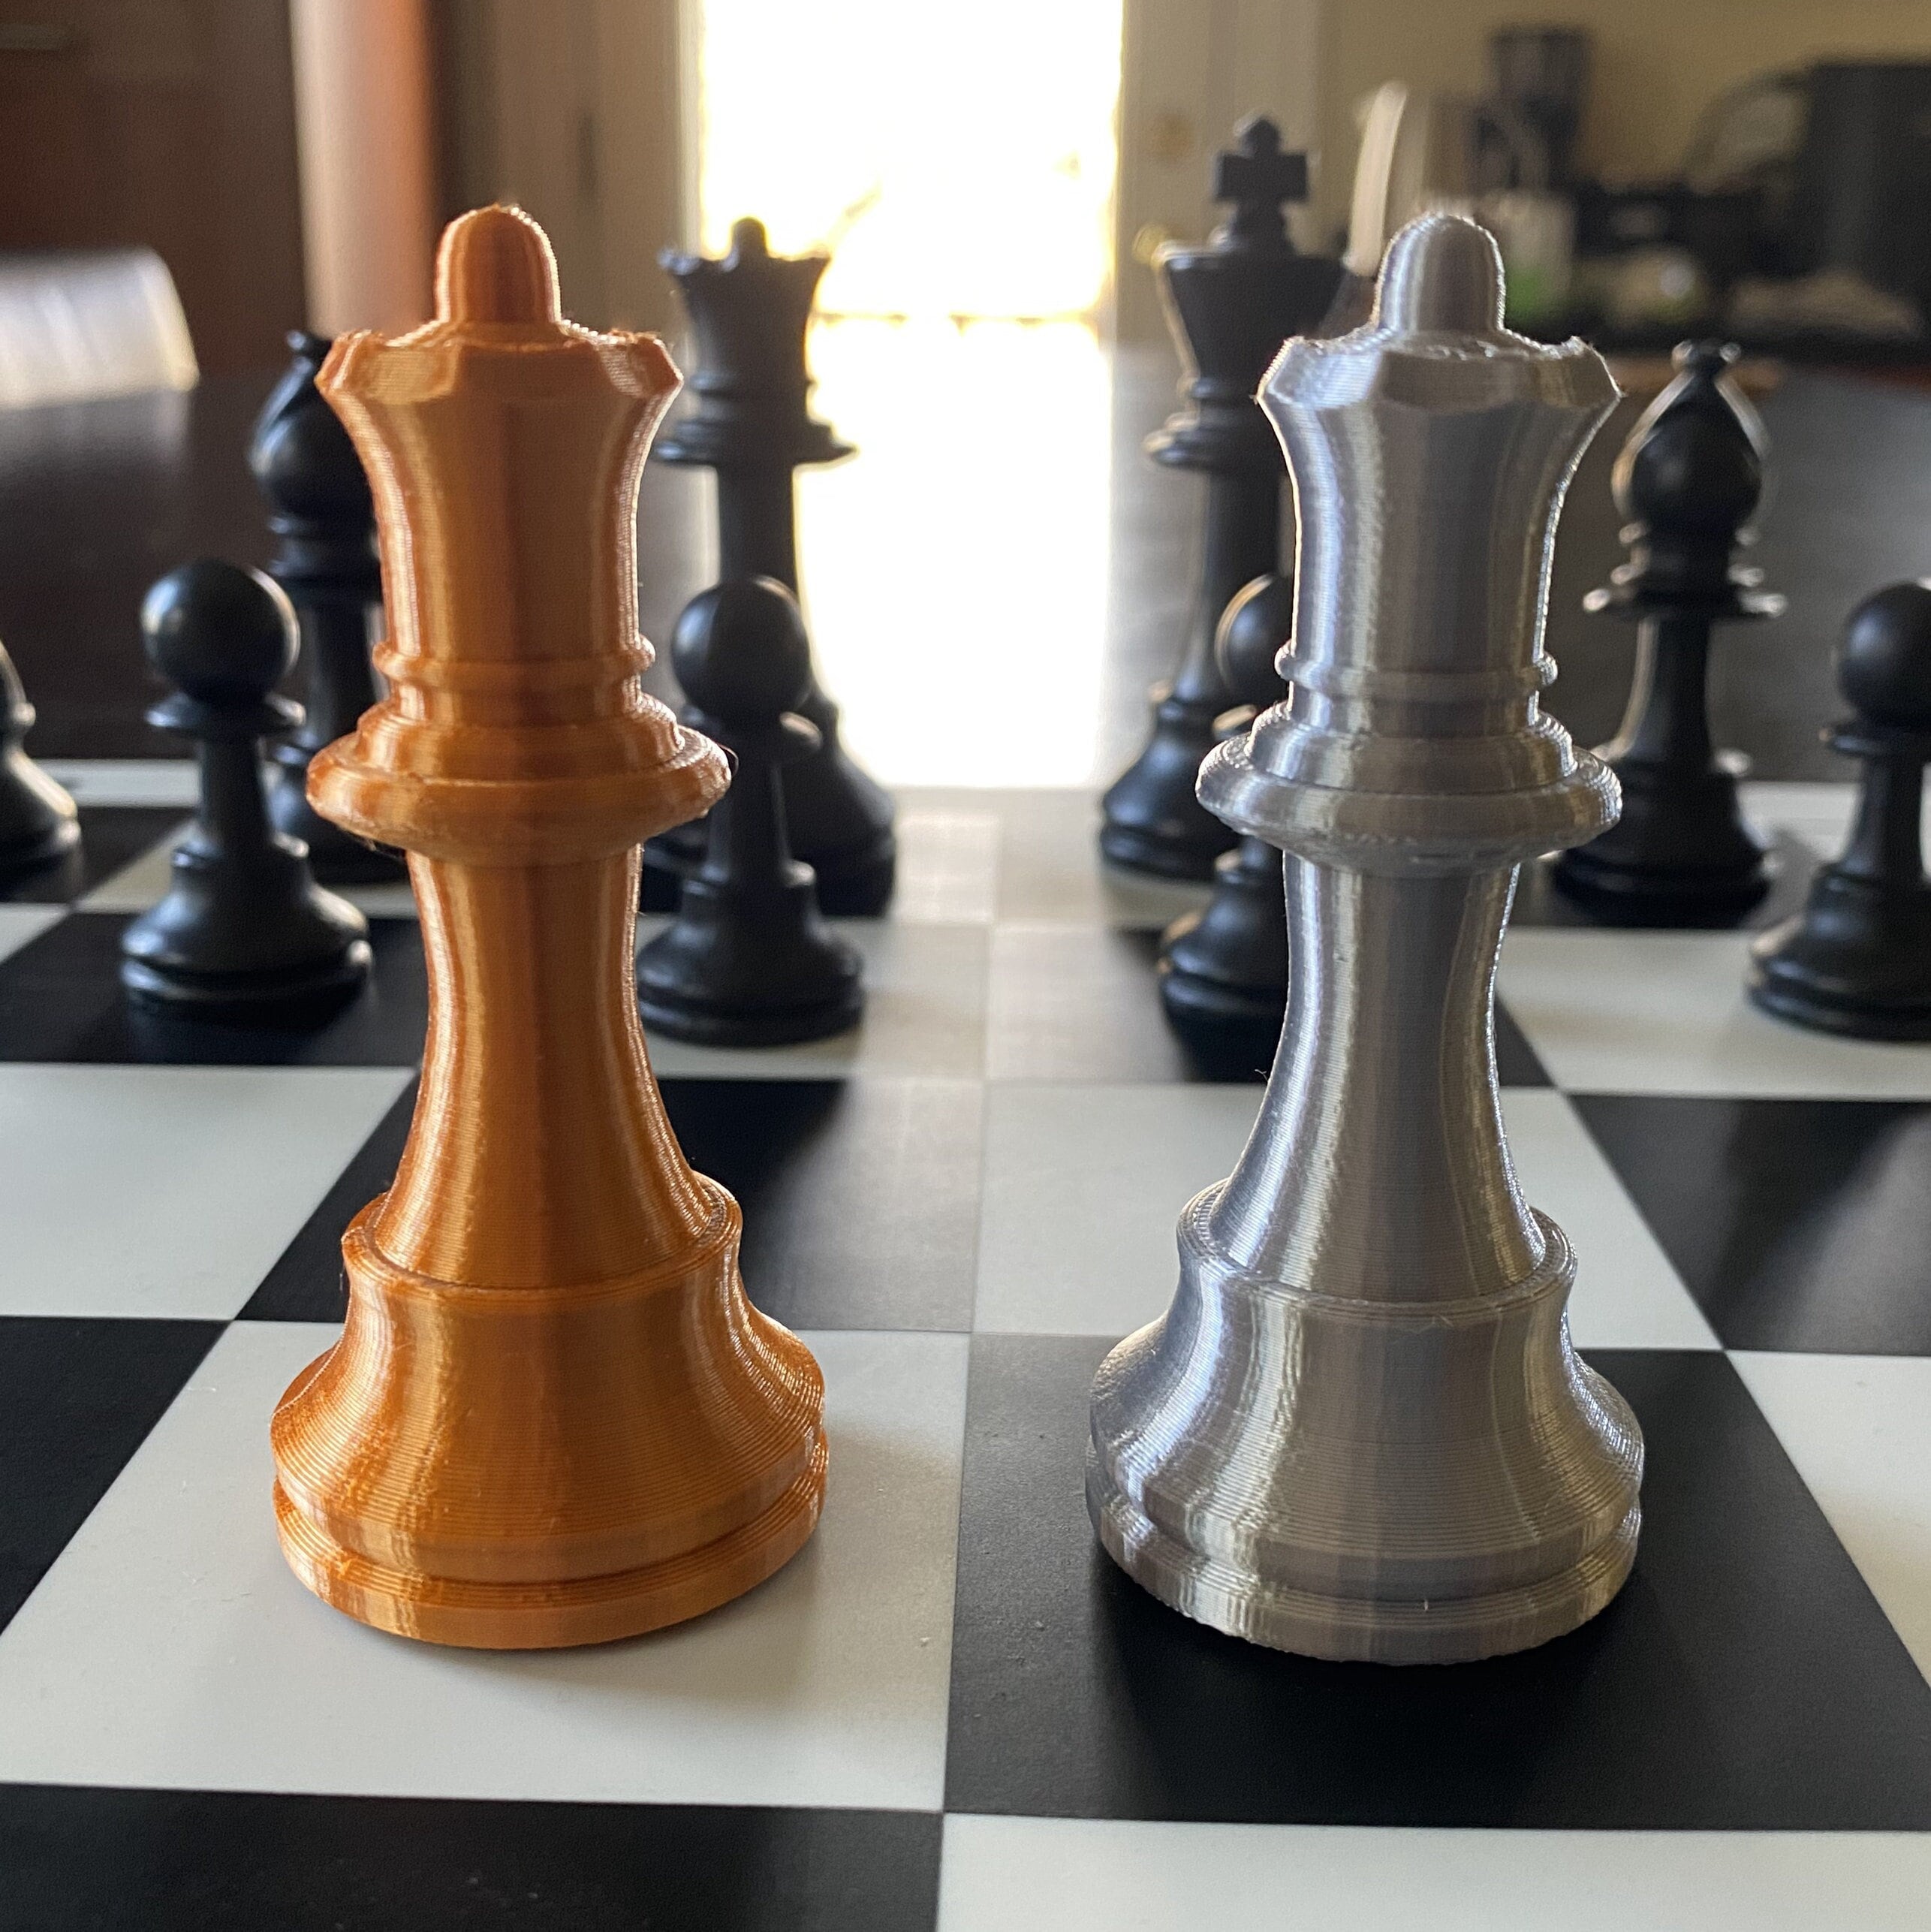 Do You Always Promote A Pawn To A Queen?